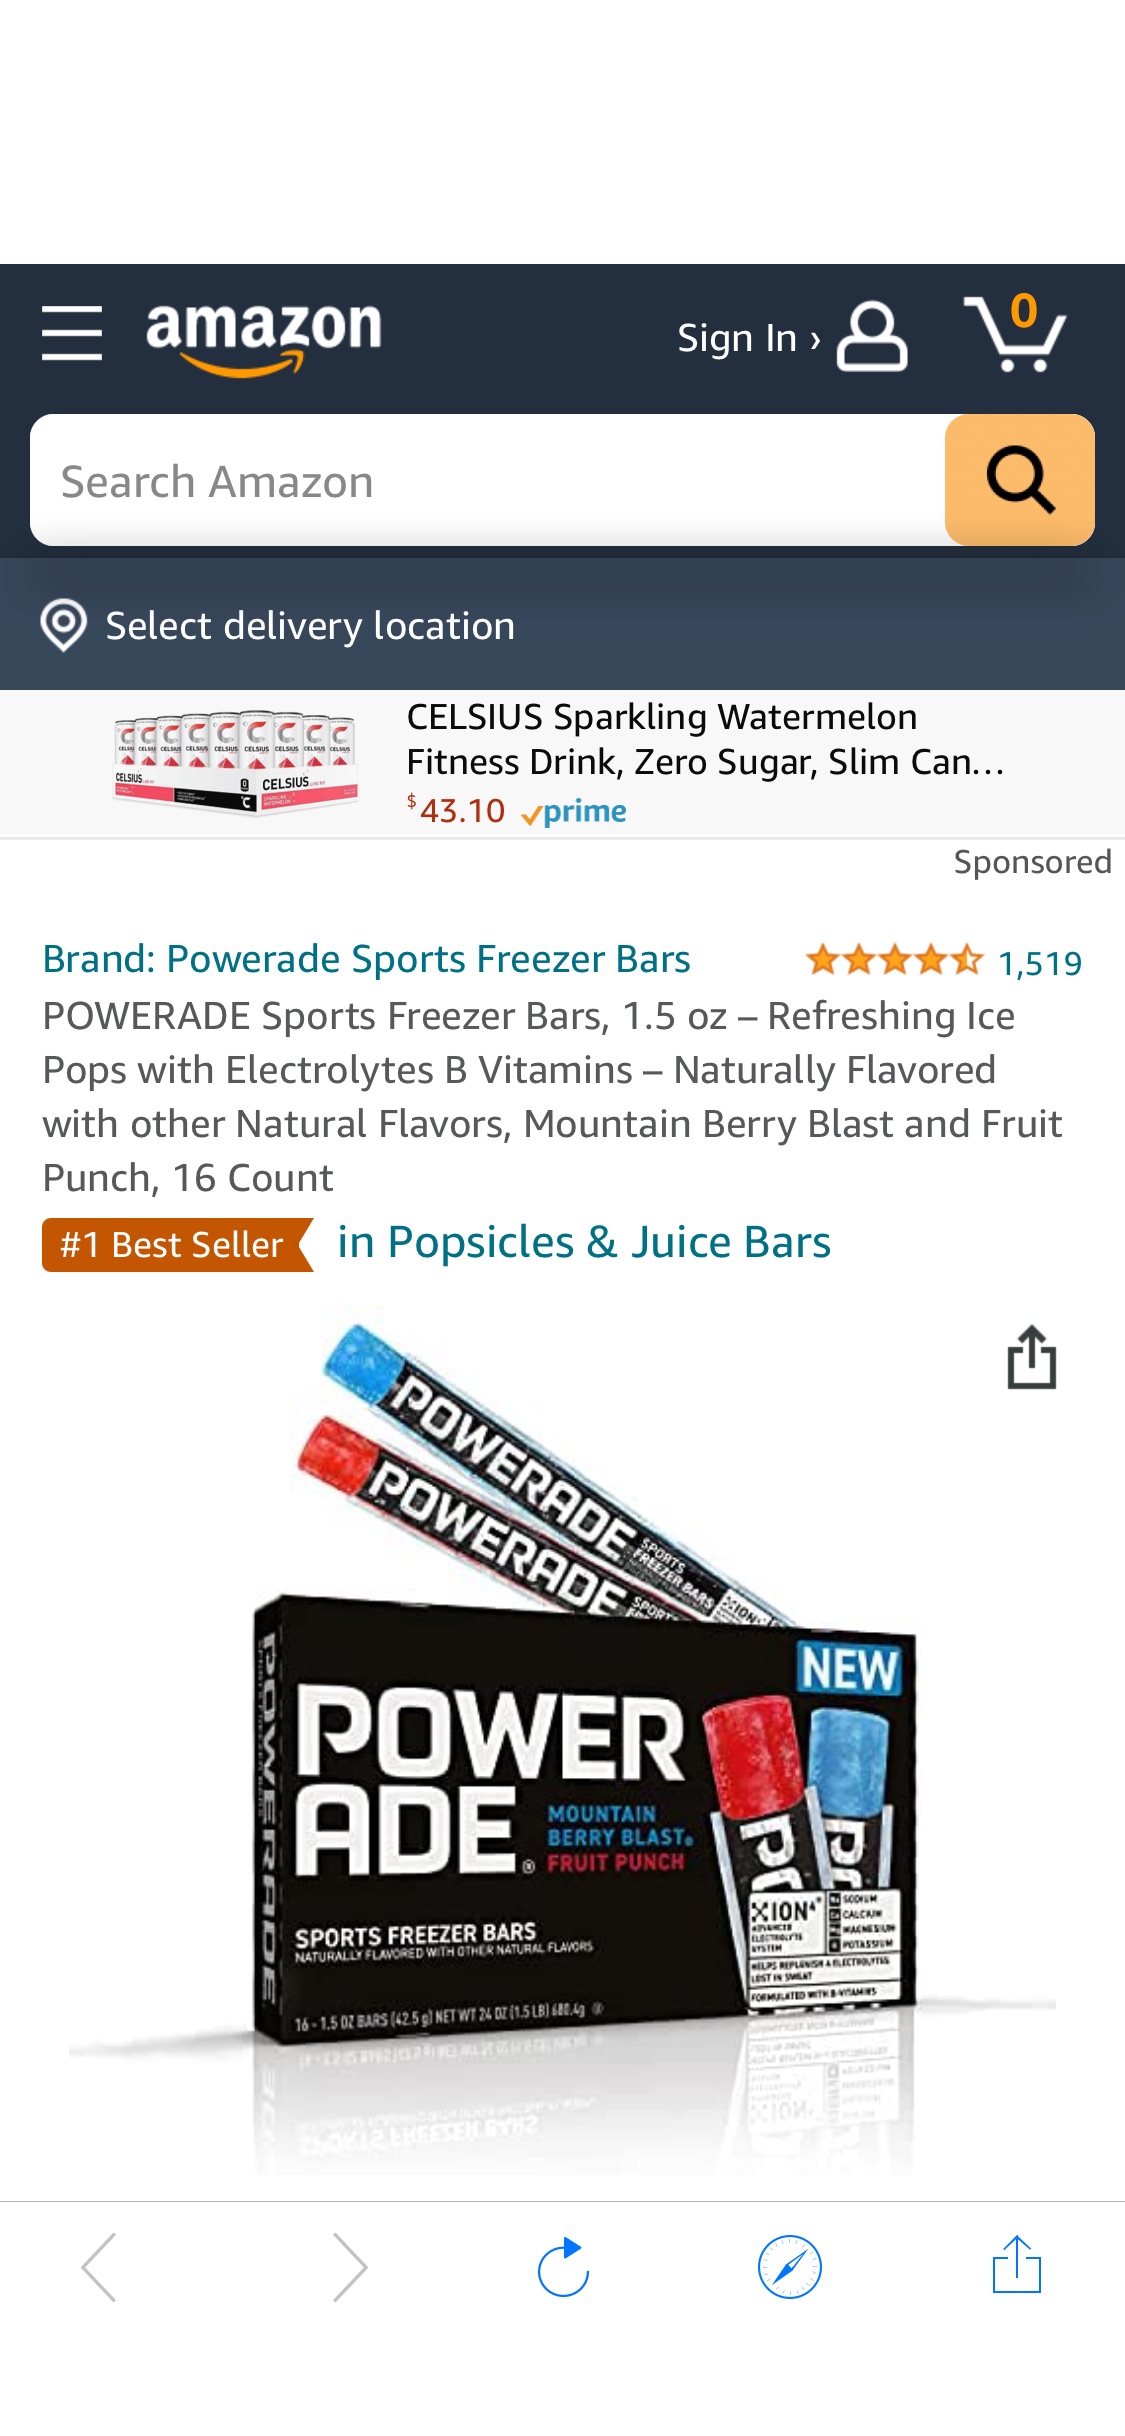 Amazon.com : POWERADE Sports Freezer Bars, 1.5 oz – Refreshing Ice Pops with Electrolytes B Vitamins – Naturally Flavored with other Natural Flavors, Mountain Berry零食